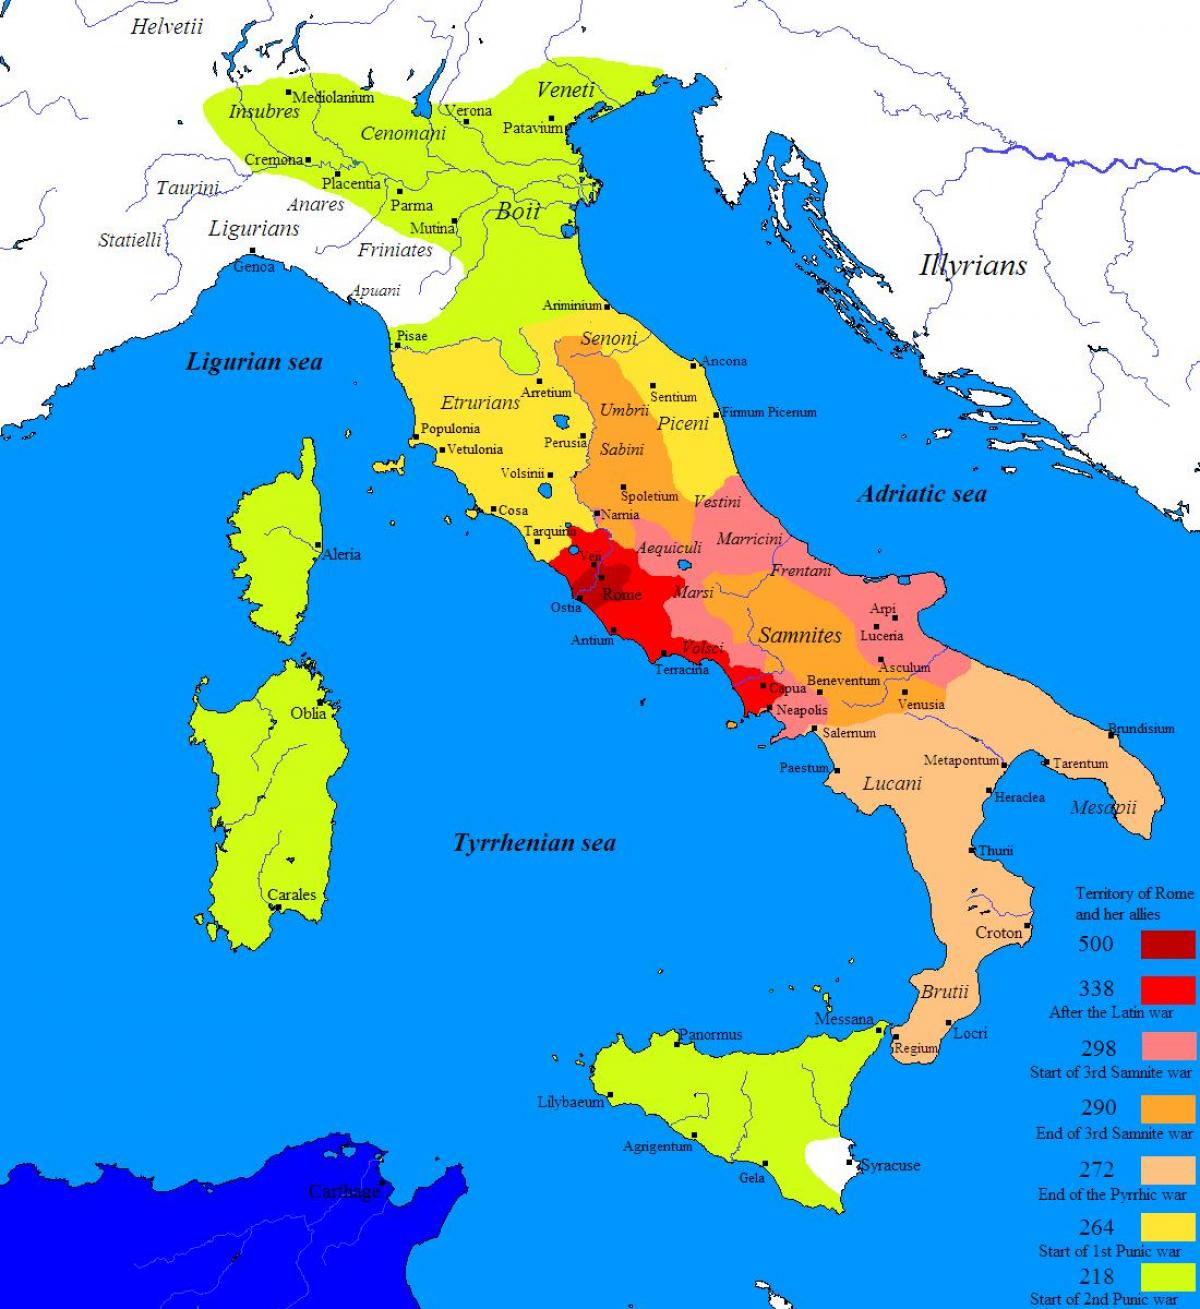 Map of ancient Rome and surrounding areas